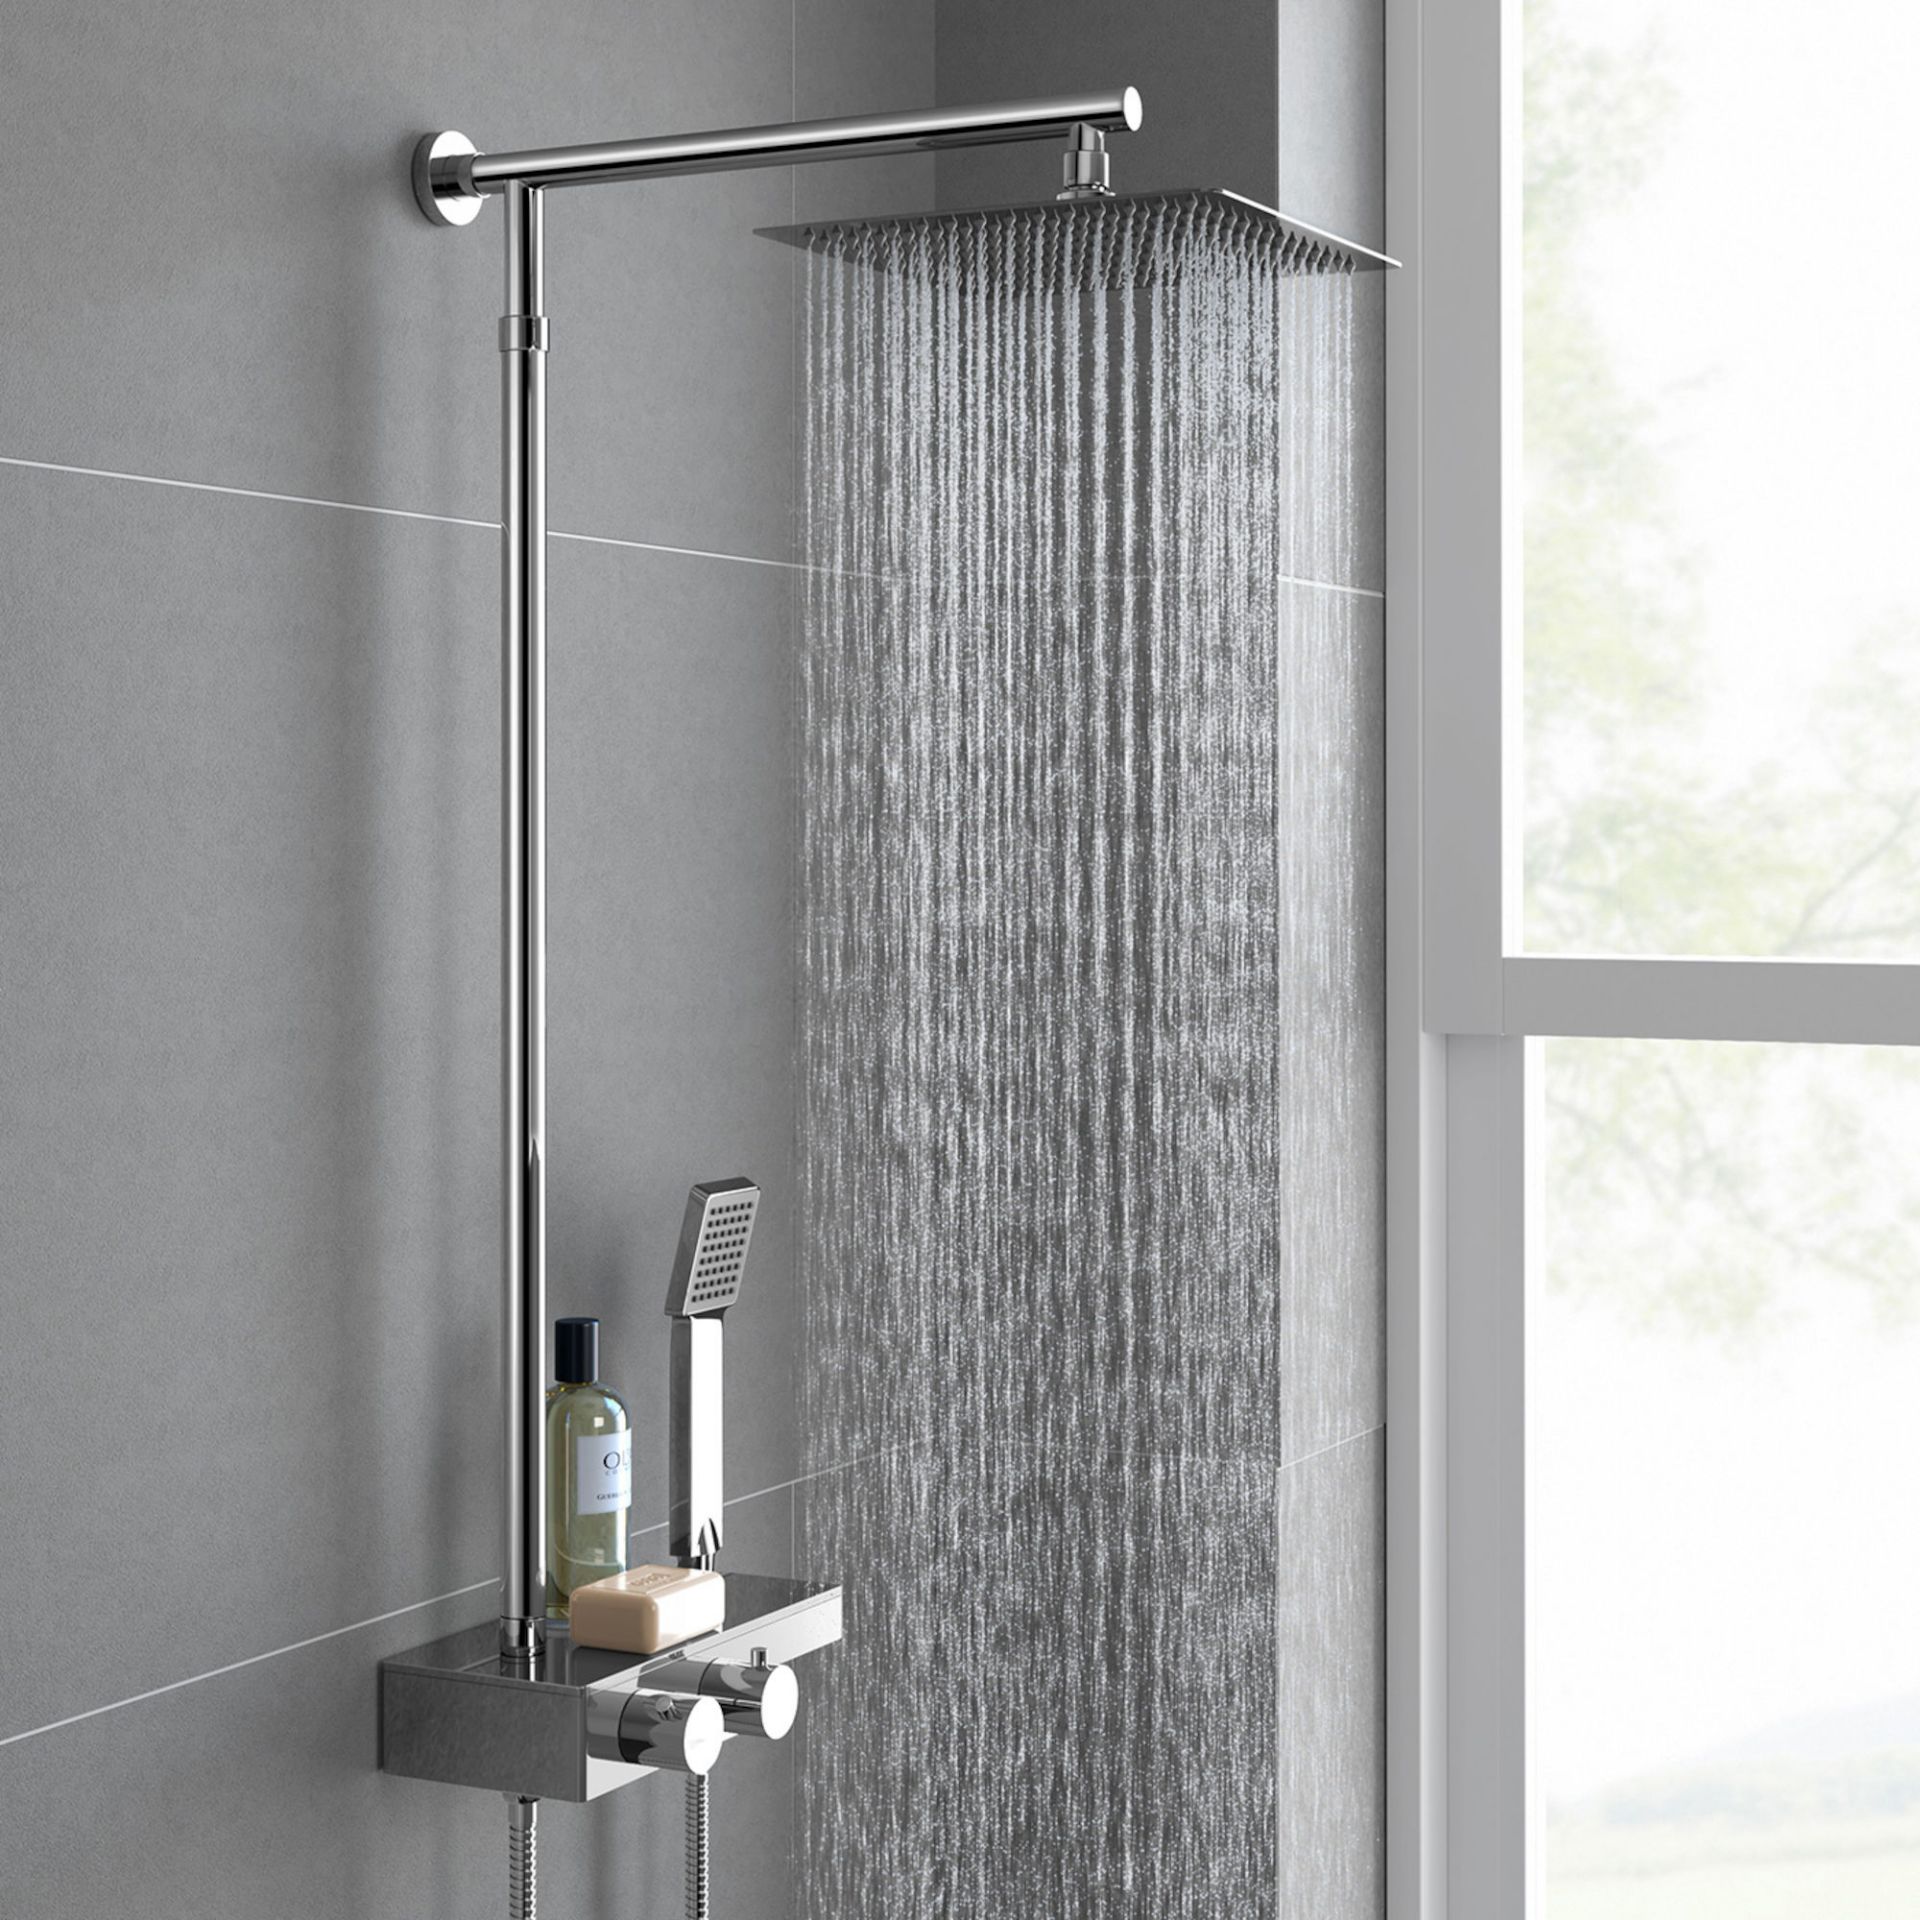 (SA179) Square Exposed Thermostatic Shower Shelf, Kit & Large Head. RRP £349.99. Style meets